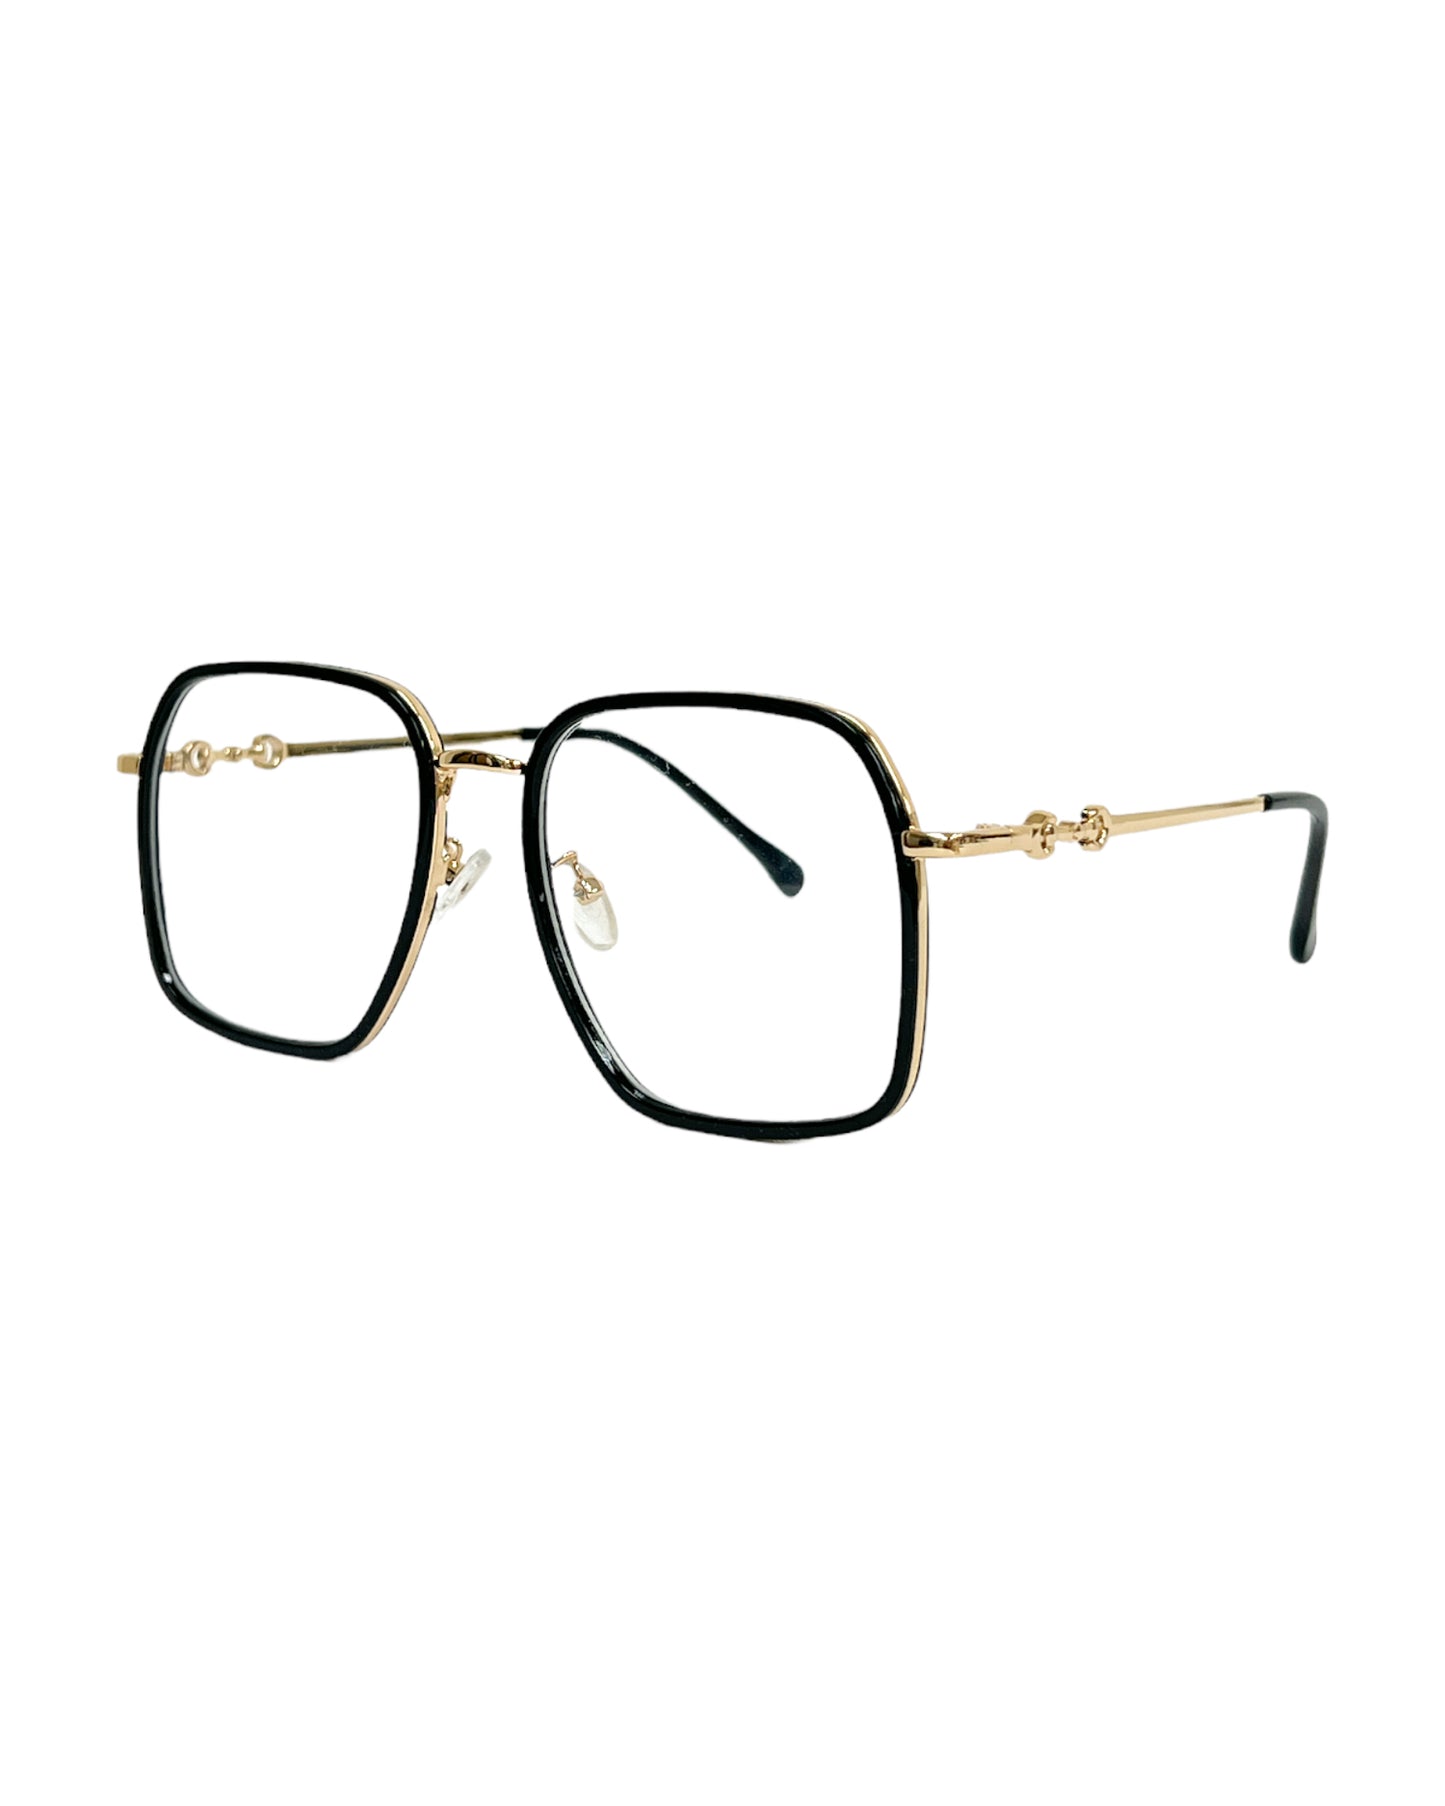 black frame with gold amrs clear lens glasses